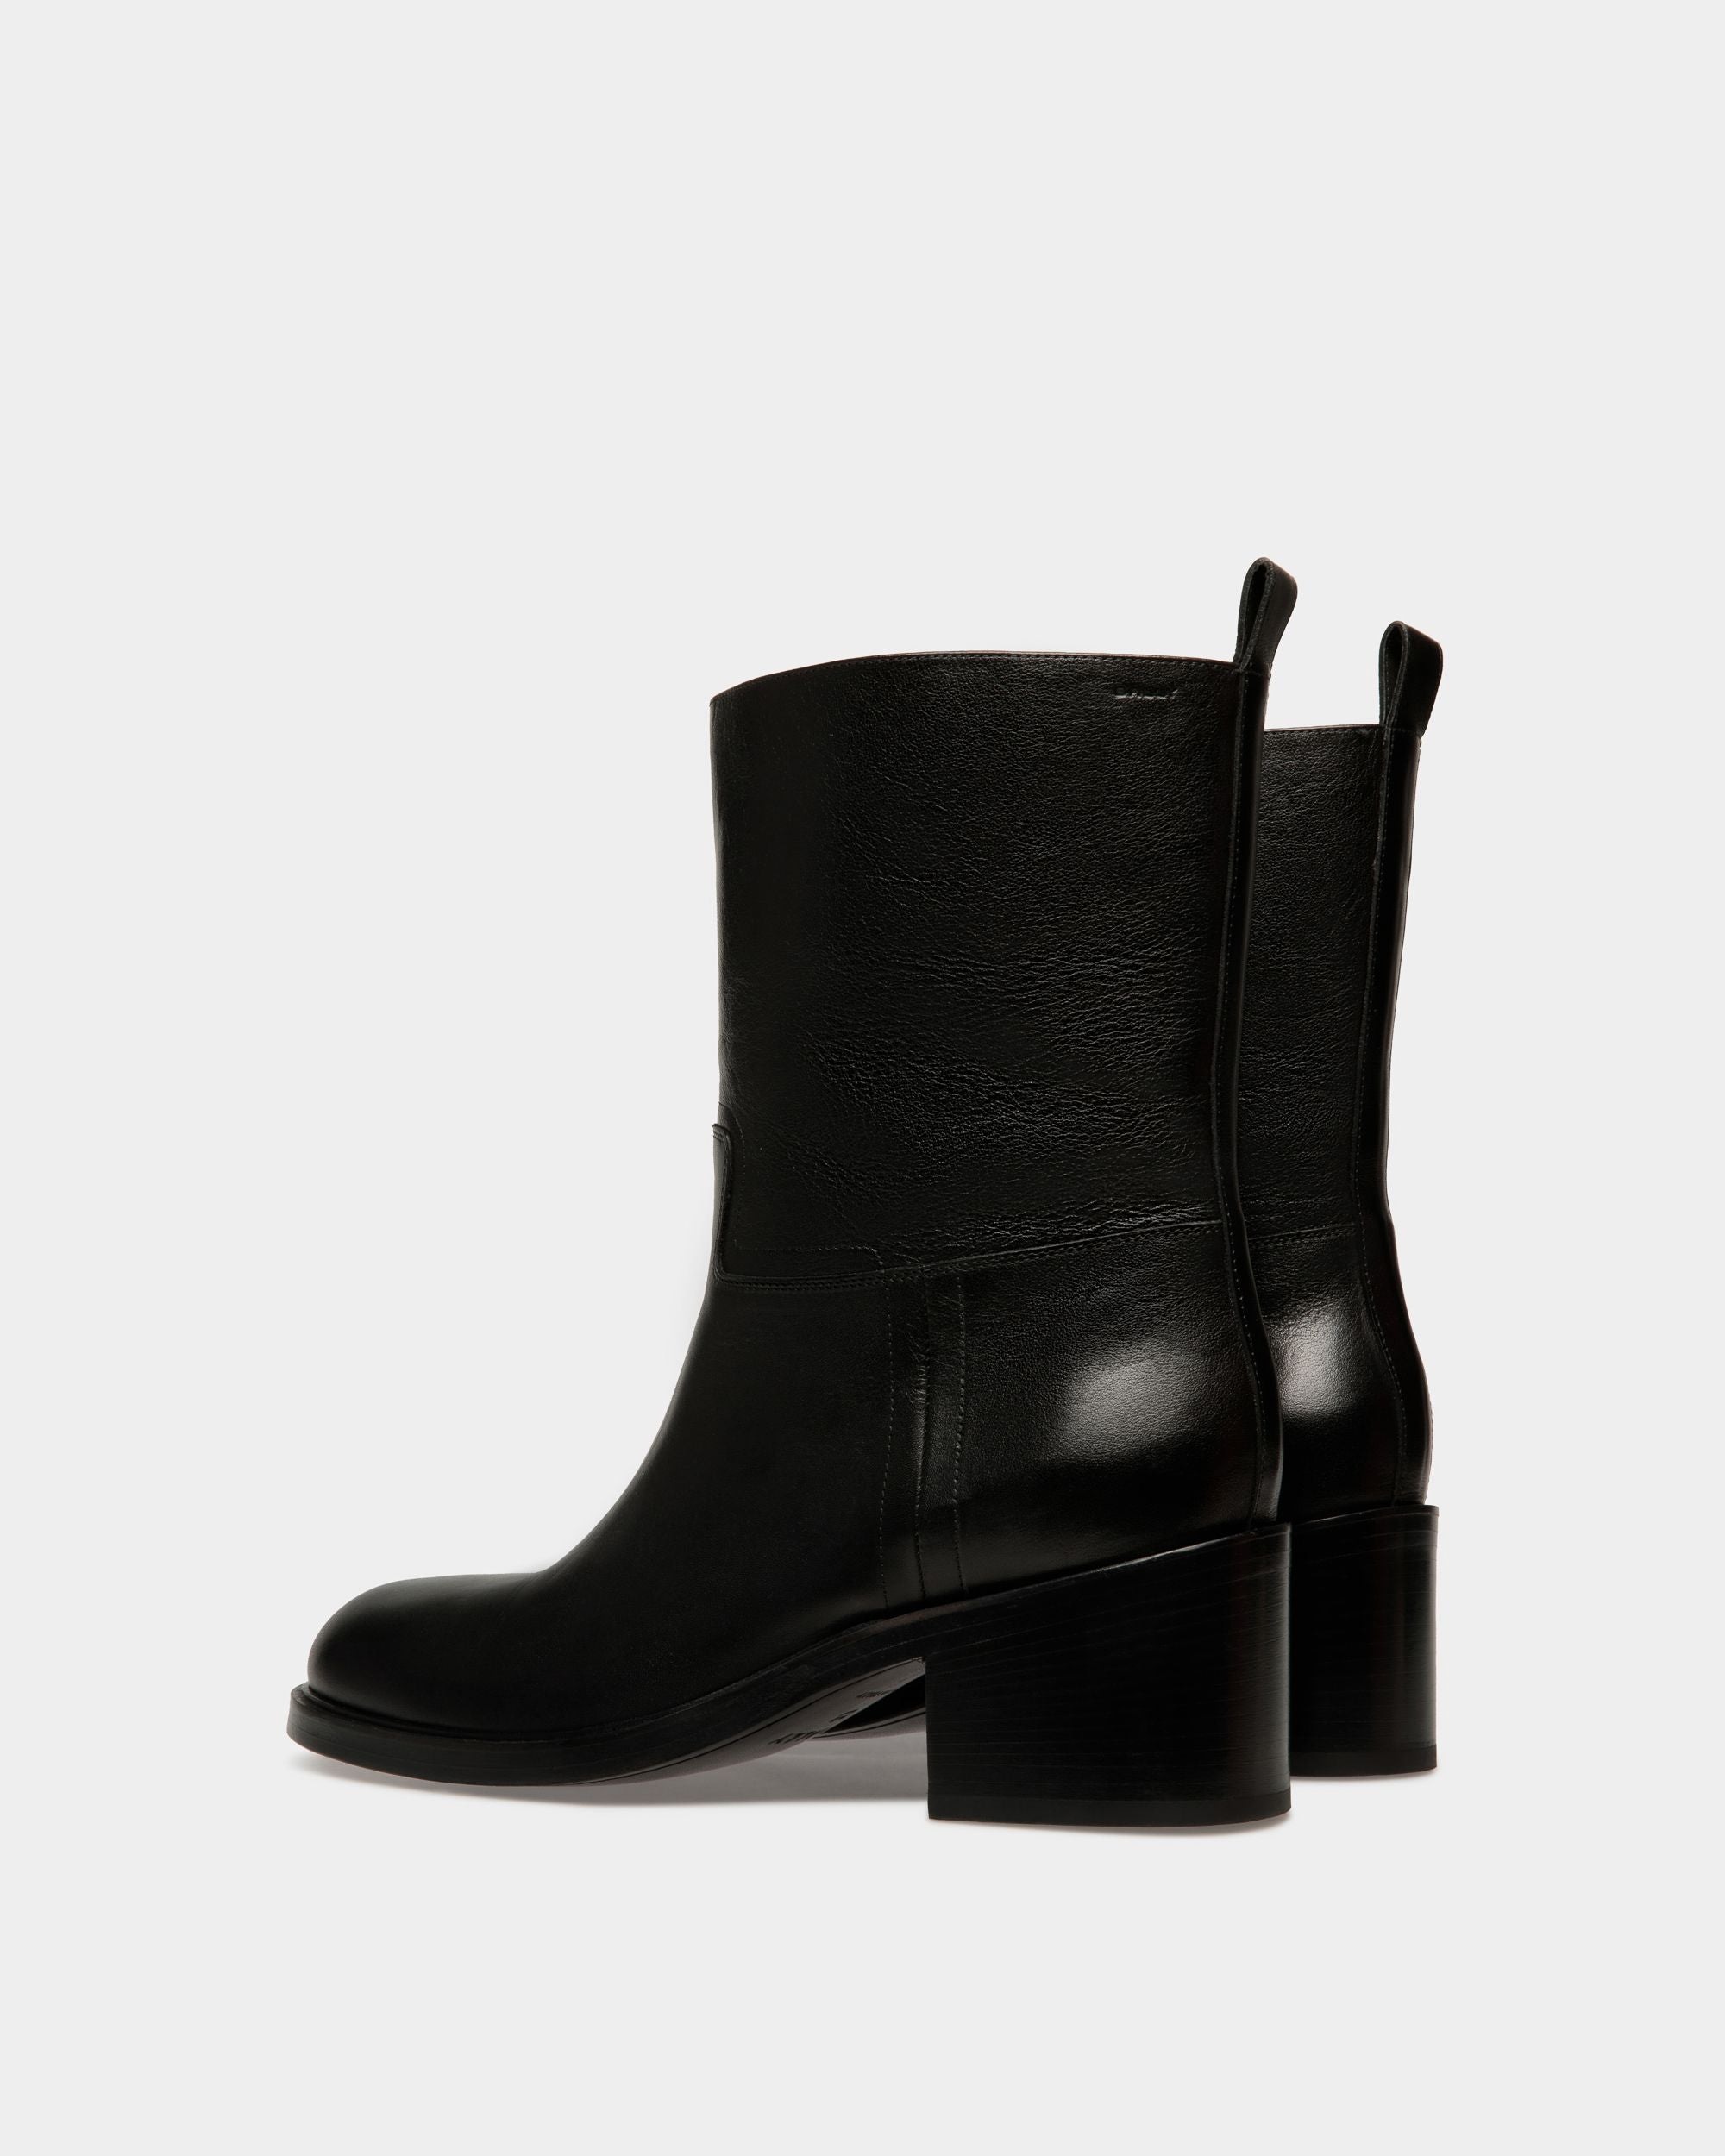 Peggy | Men's Boot in Black Leather | Bally | Still Life 3/4 Back